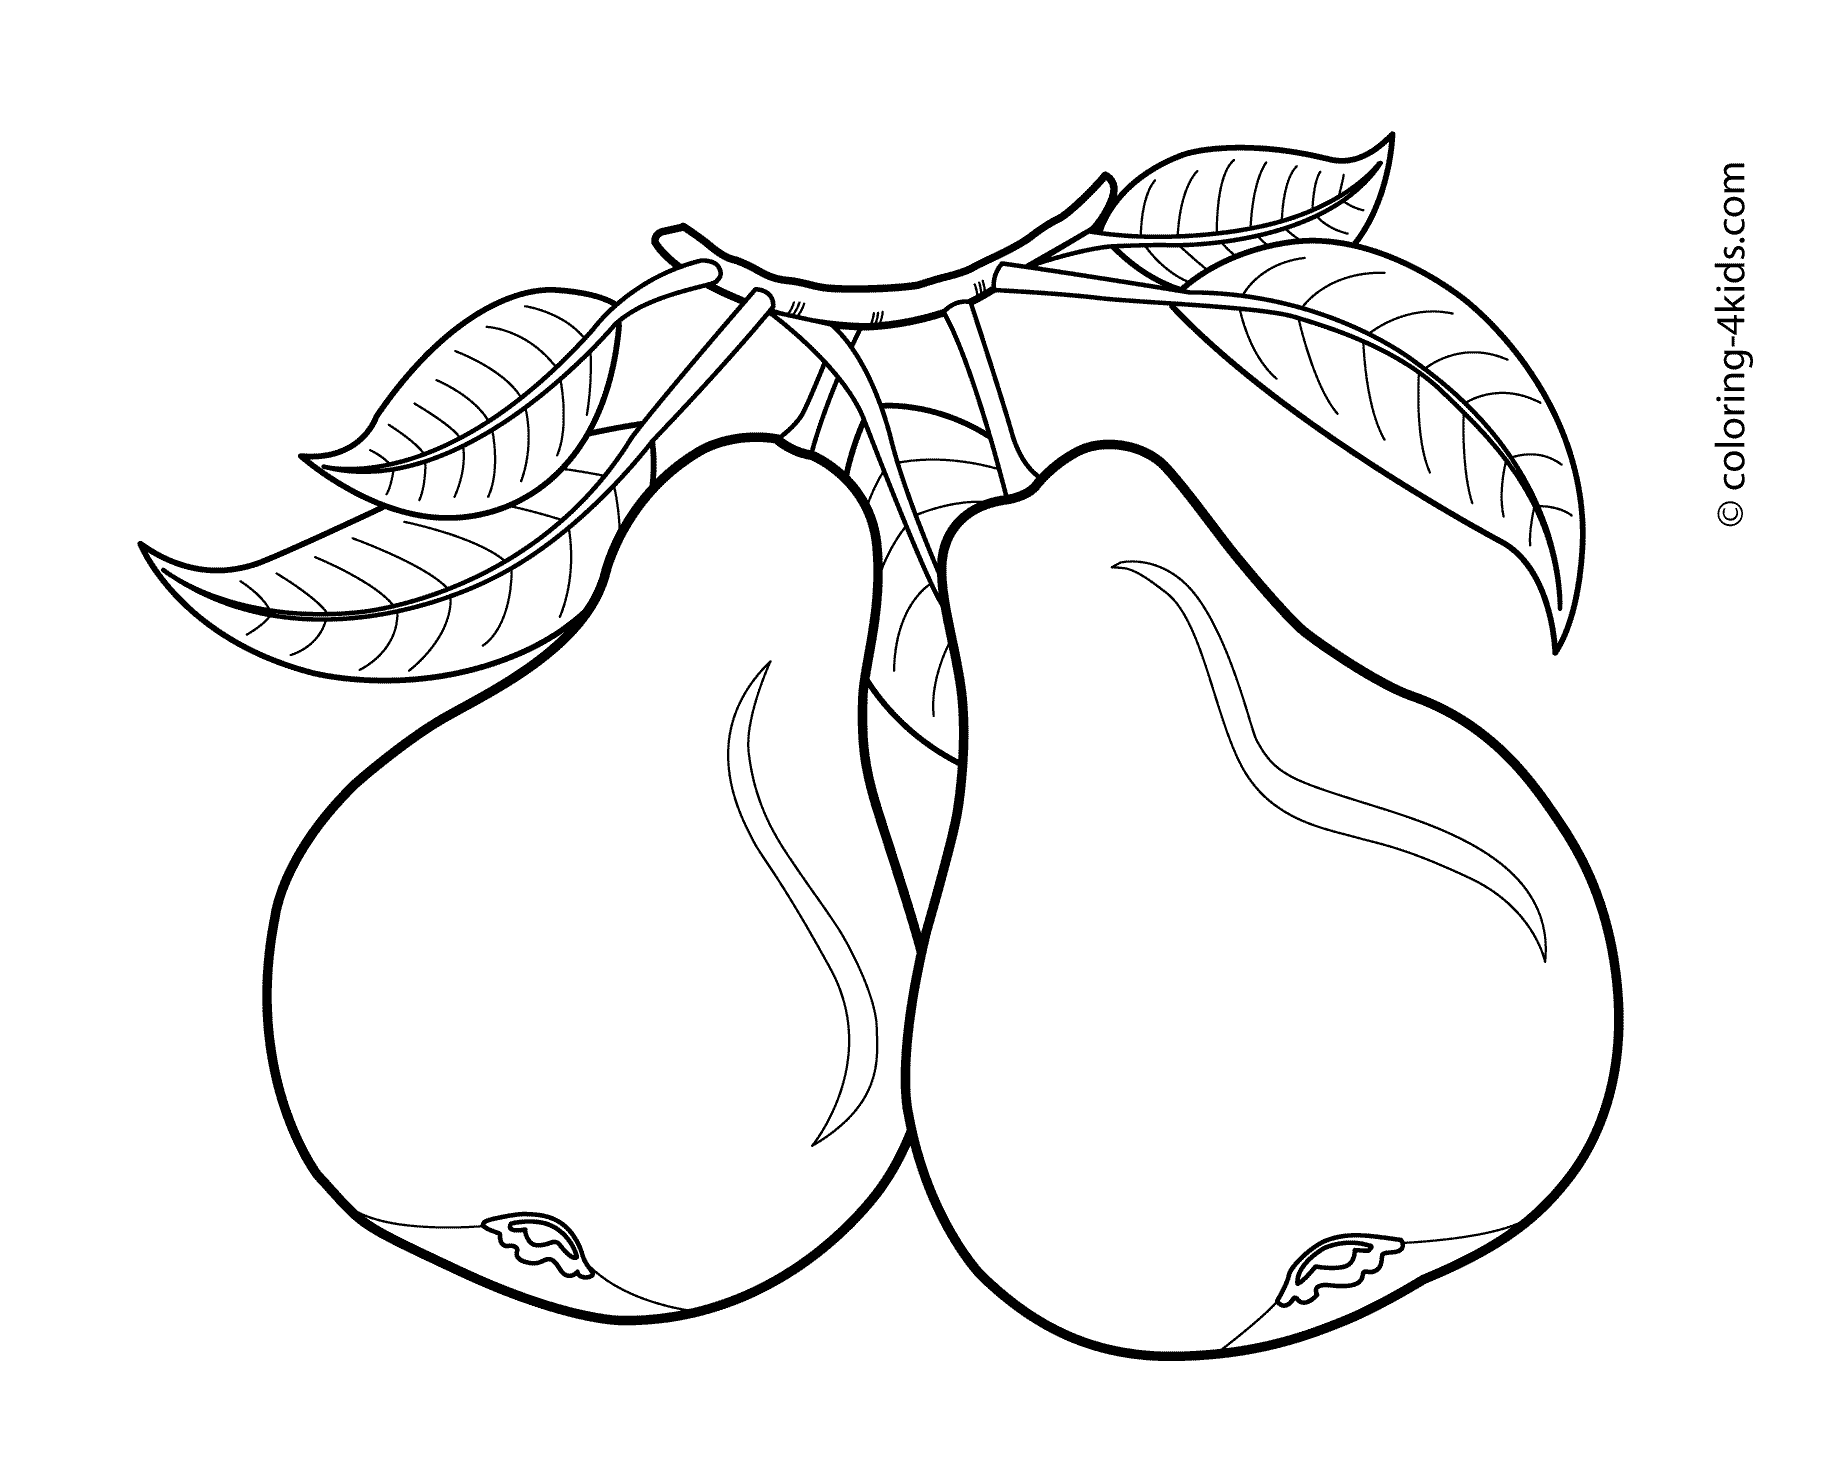 Pears Fruits Coloring Pages For Kids, Printable Free | Fruit Coloring Pages, Coloring Pages, Coloring Pages For Kids - Coloring Home